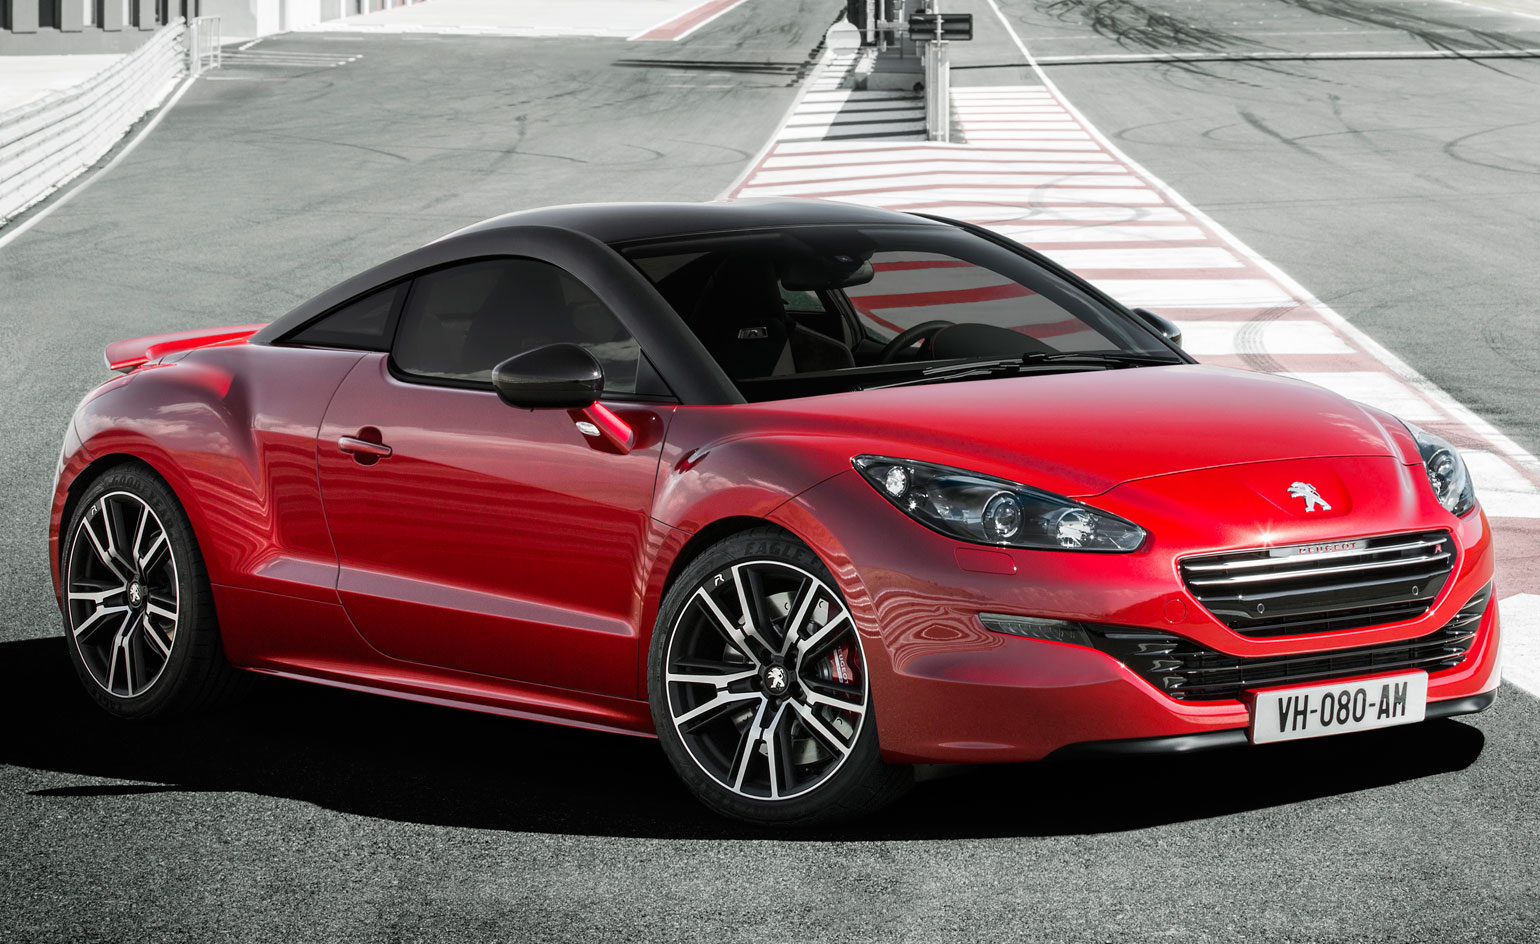 Peugeot's RCZ-R adds power to its small, perfectly formed flagship